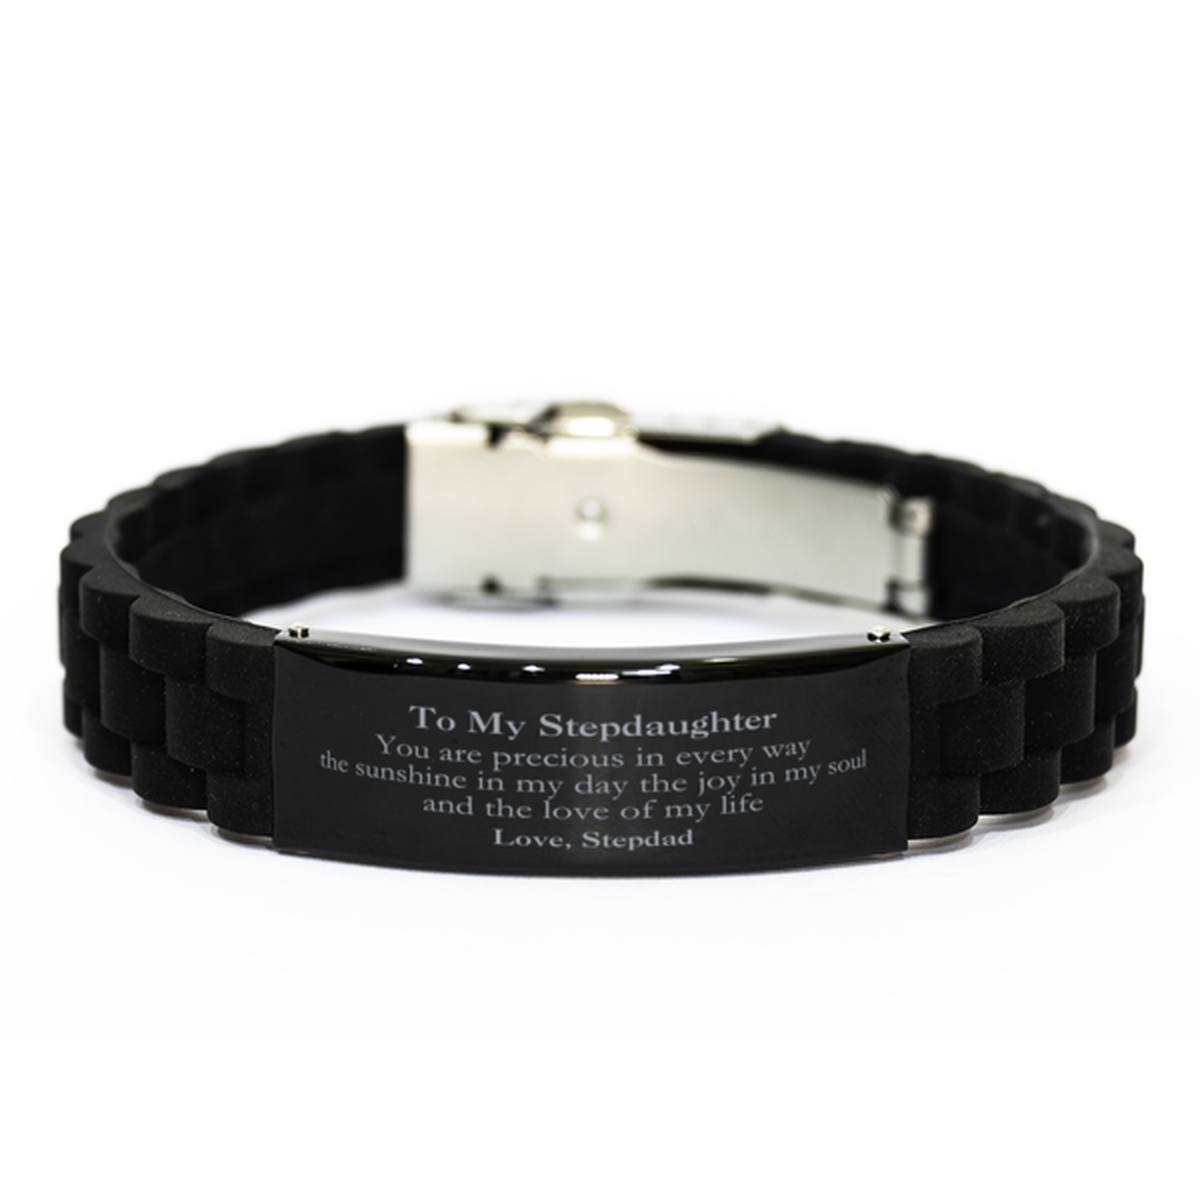 Graduation Gifts for Stepdaughter Black Glidelock Clasp Bracelet Present from Stepdad, Christmas Stepdaughter Birthday Gifts Stepdaughter You are precious in every way the sunshine in my day. Love, Stepdad